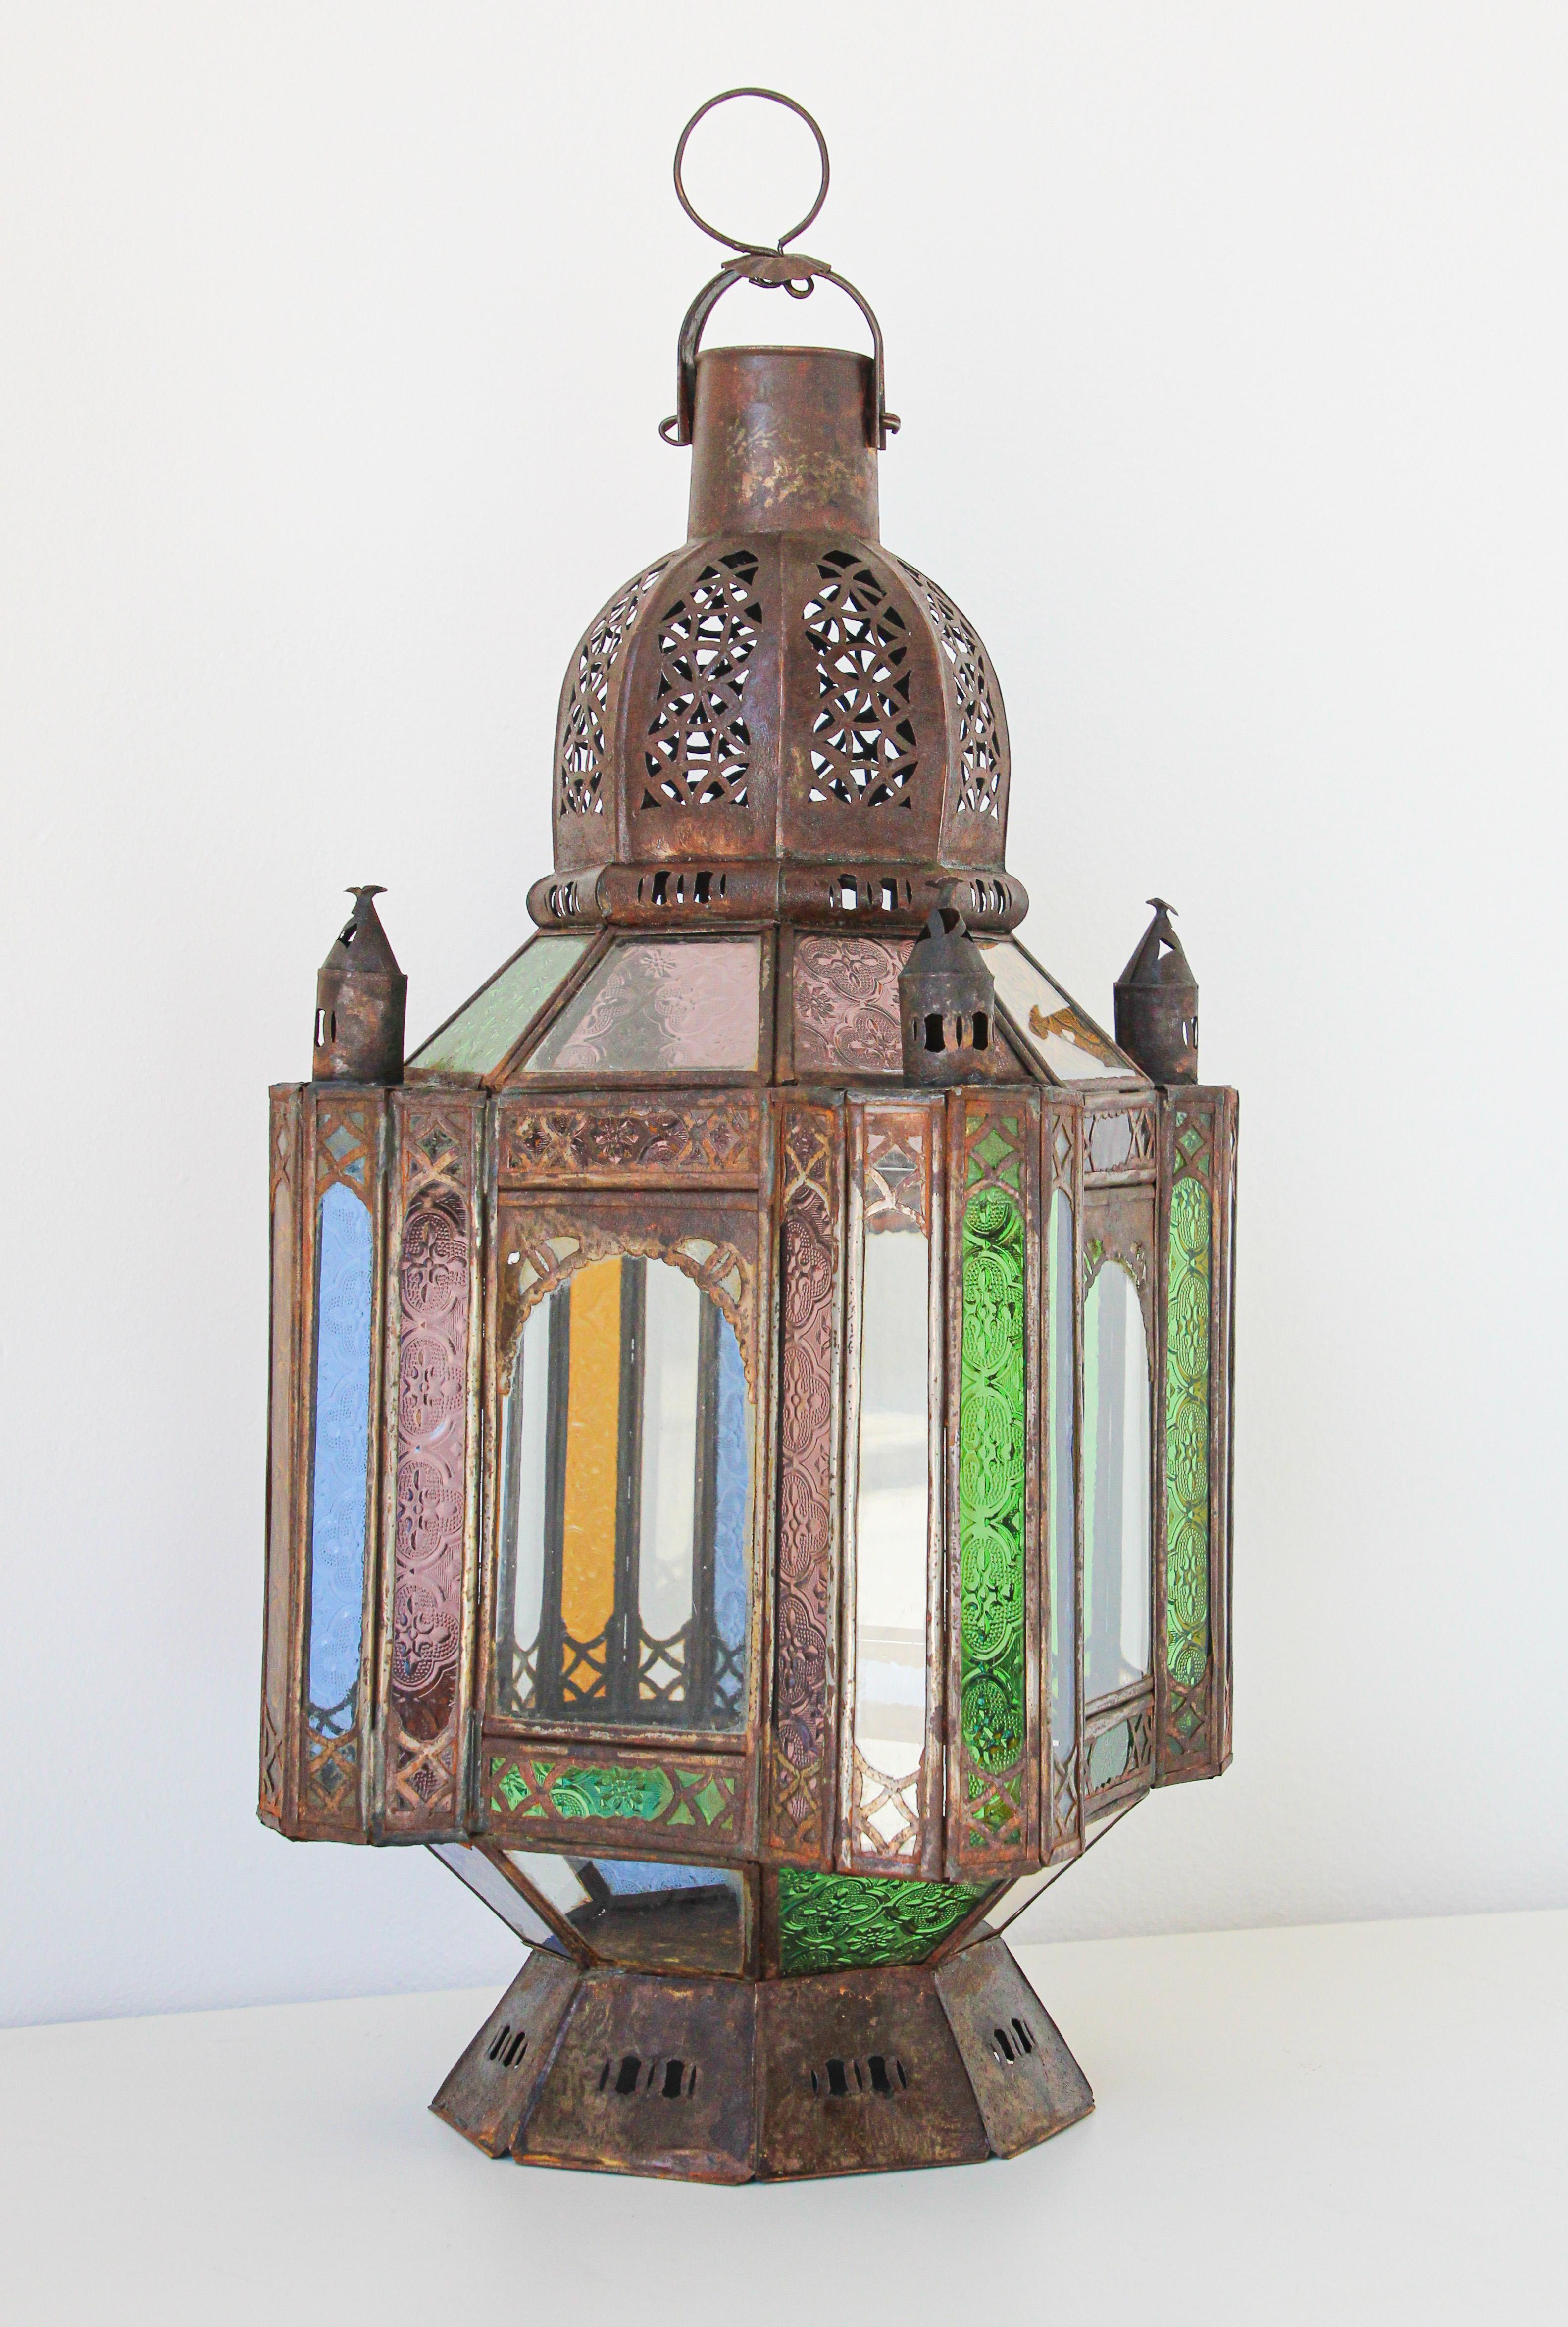 Handcrafted vintage Moroccan metal glass lantern or Moorish pendant.
Moorish style North African lantern with multi-color molded colored glass panels in green, lavender, blue and clear.
Hurricane candle lamp handmade in Marrakech, vintage metal in